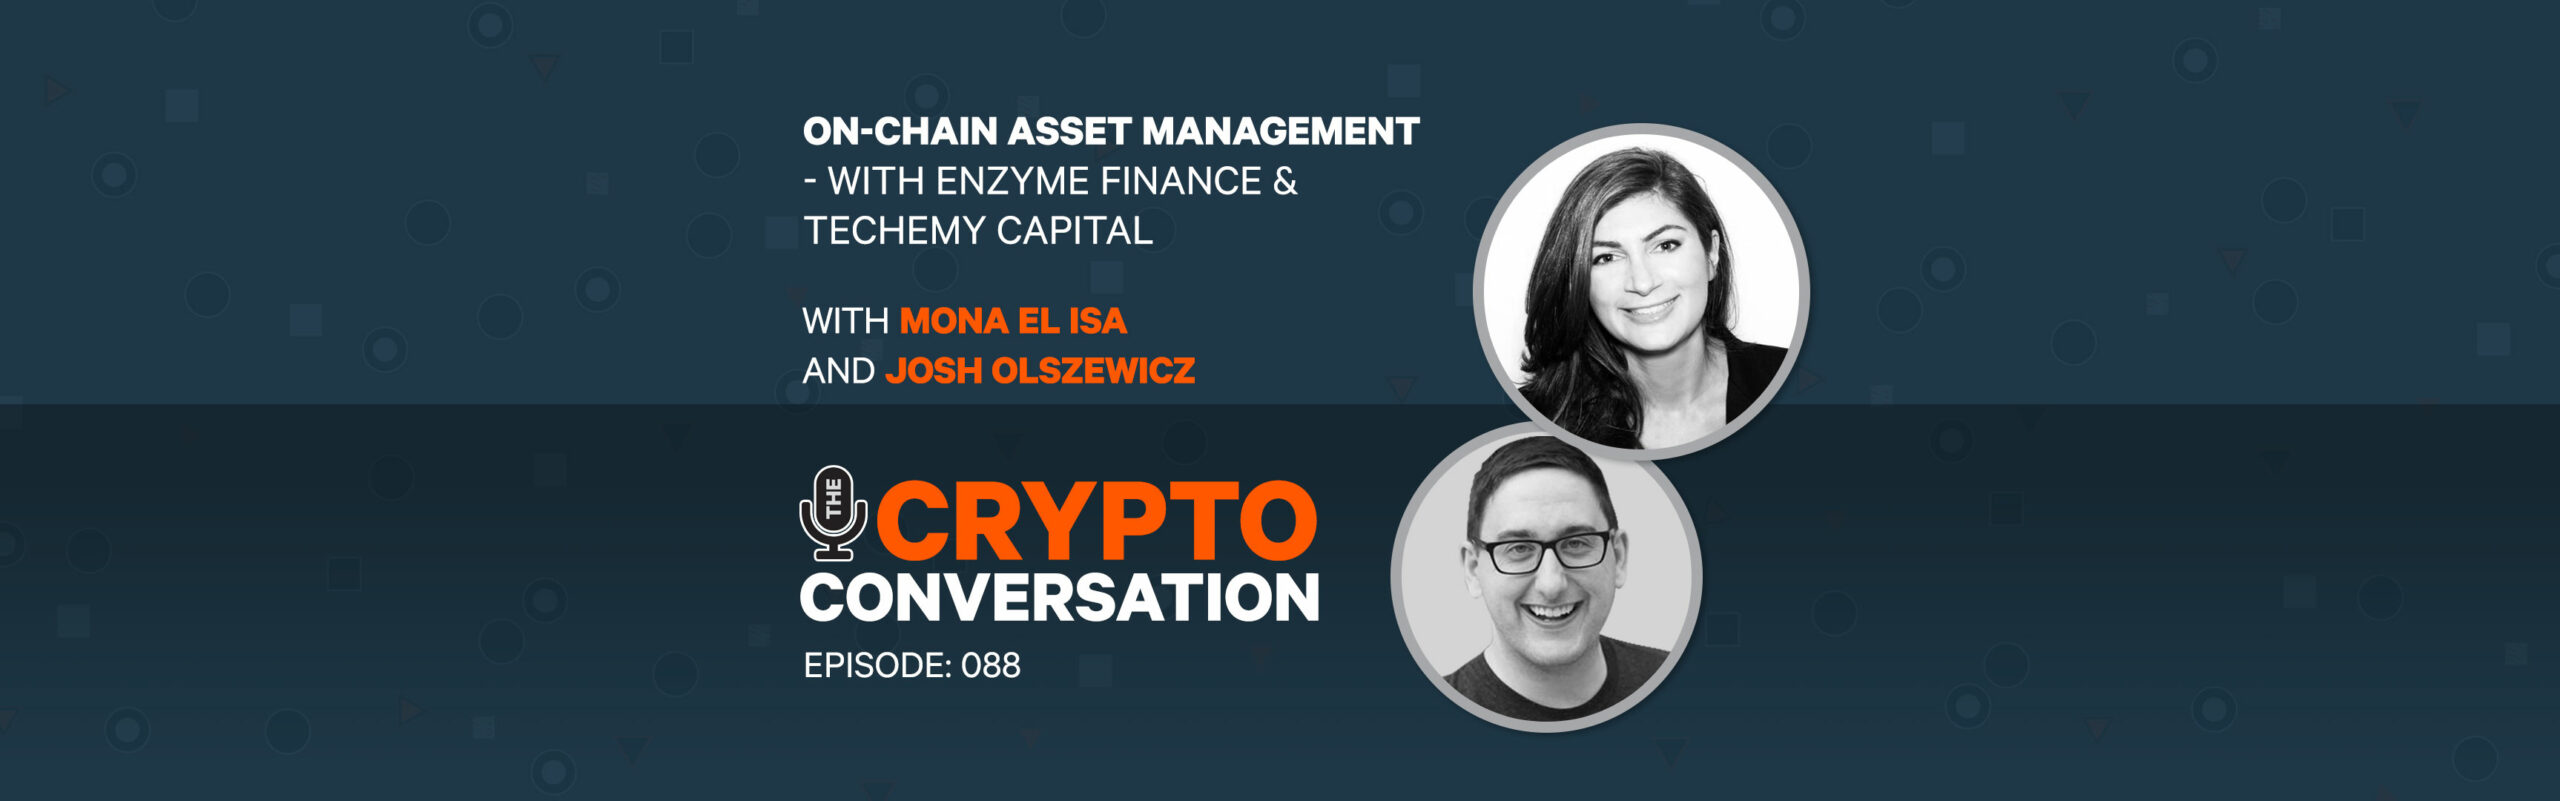 On-chain asset management with Enzyme Finance & Techemy Capital